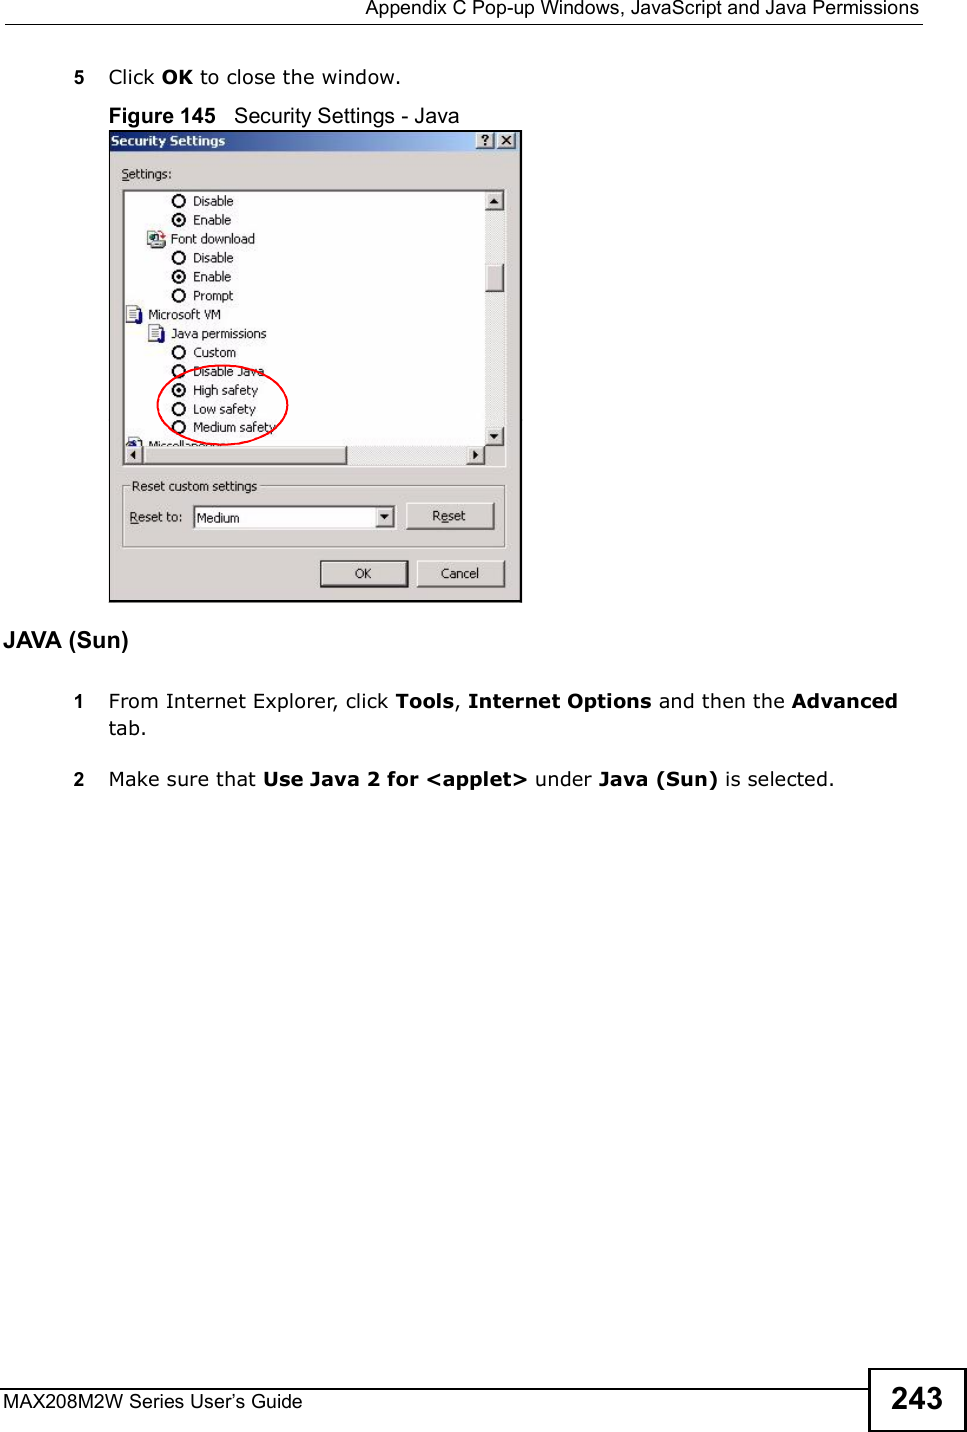  Appendix CPop-up Windows, JavaScript and Java PermissionsMAX208M2W Series User s Guide 2435Click OK to close the window.Figure 145   Security Settings - Java JAVA (Sun)1From Internet Explorer, click Tools, Internet Options and then the Advanced tab. 2Make sure that Use Java 2 for &lt;applet&gt; under Java (Sun) is selected.